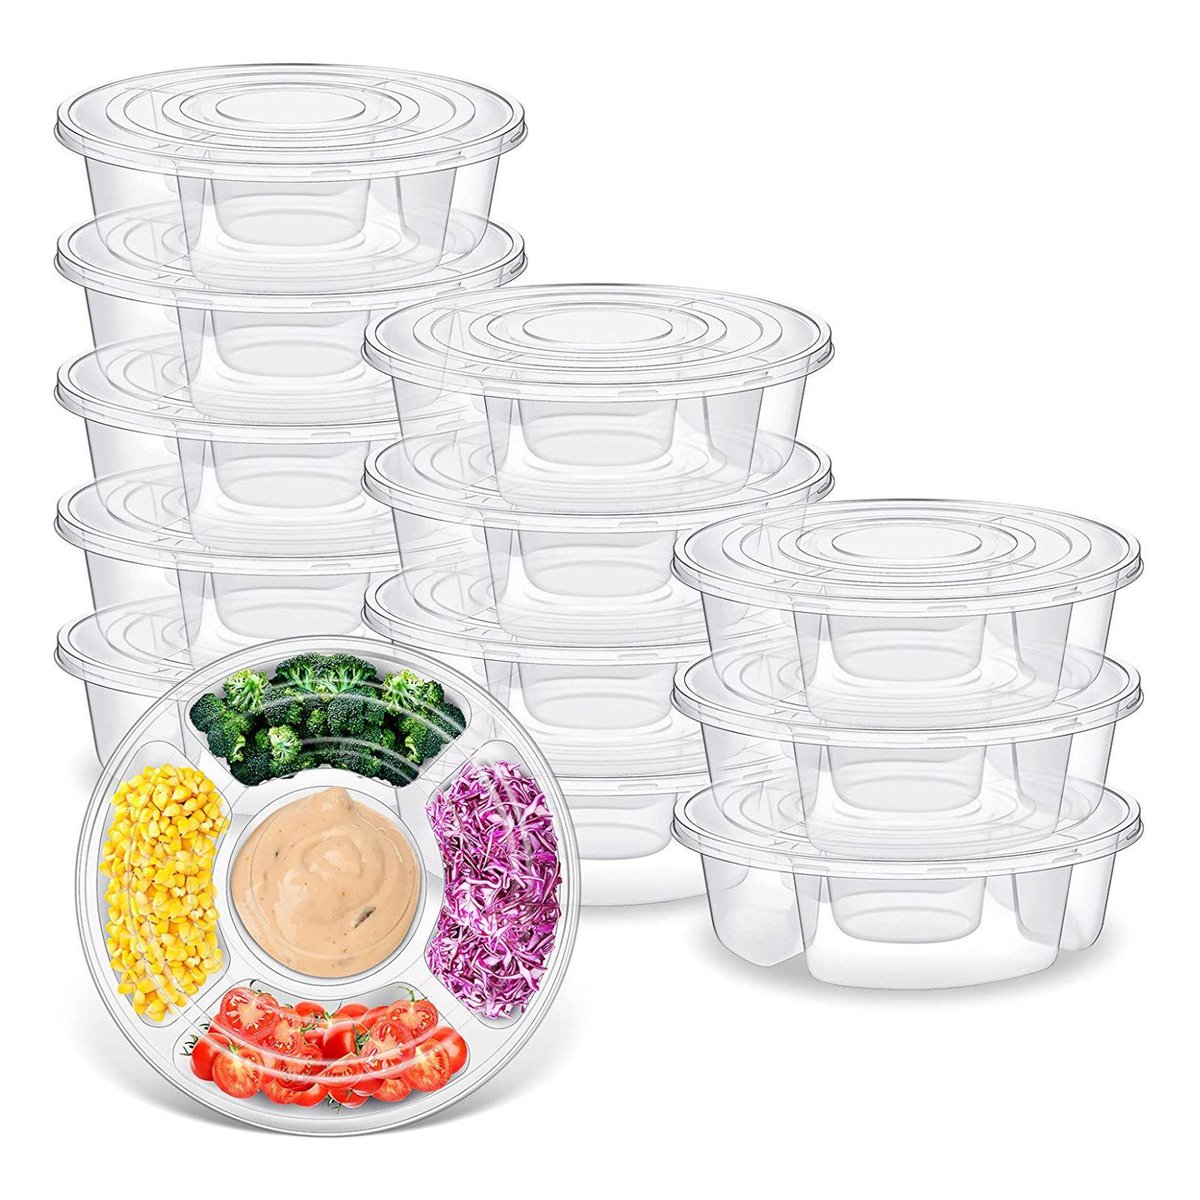 'Perfect round appetizer serving trays with lids and compartments!' 

pepperykitchennpassion.com/12-pcs-round-a… 

#appetizerservingtrays #roundtrays #lidservingcontainers #5compartmenttrays #partyplatters #entertainingessentials #foodpresentation #servingware #foodcontainers #appetizerdisplay